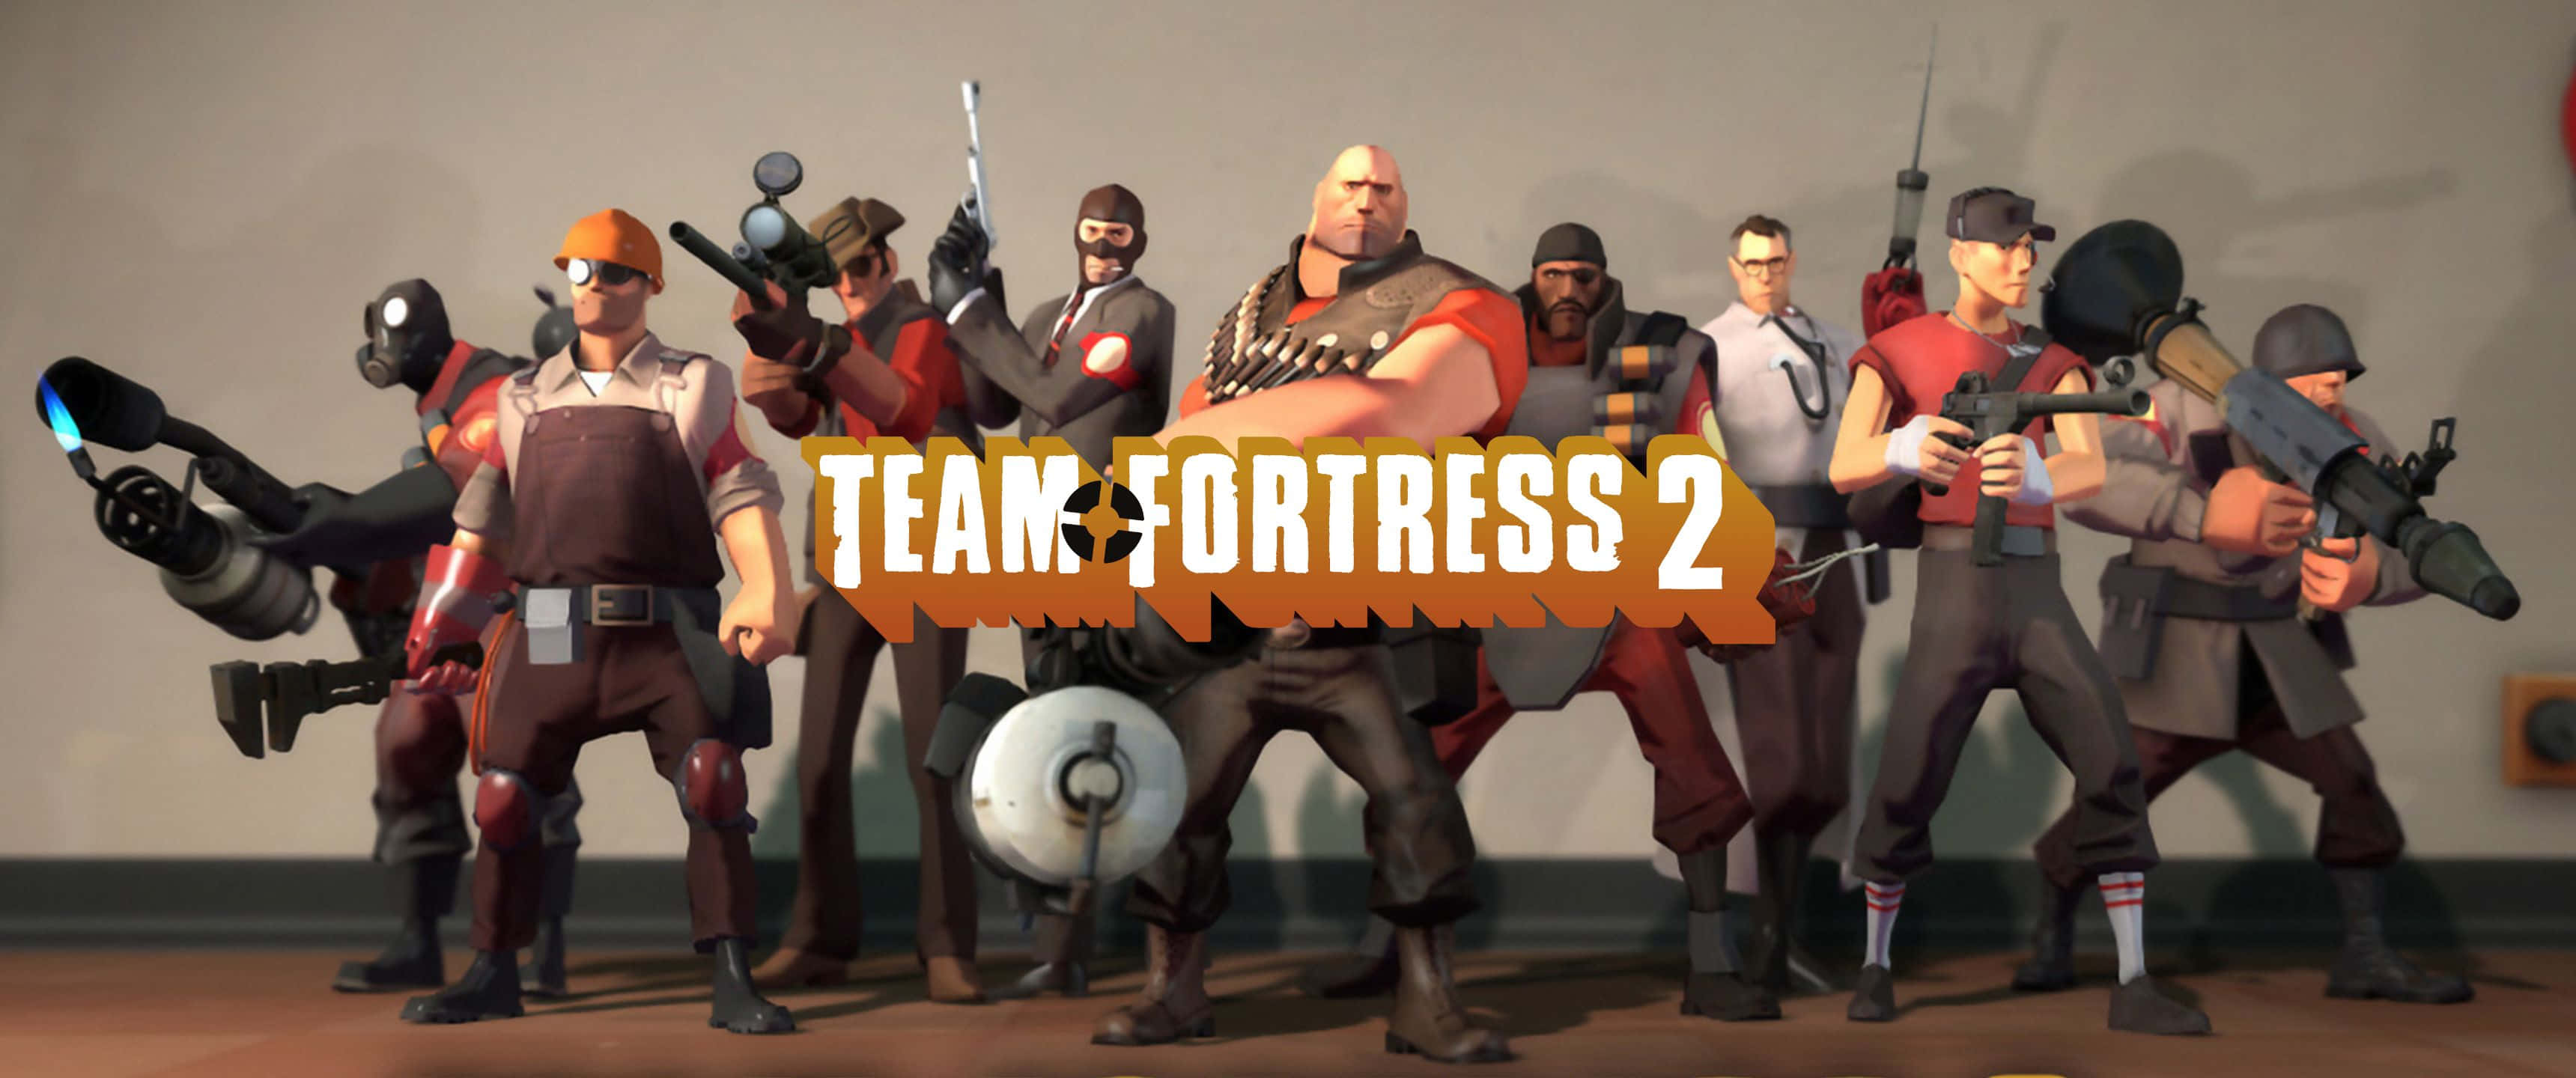 A Group Of People Standing In Front Of The Word Team Fortress 2